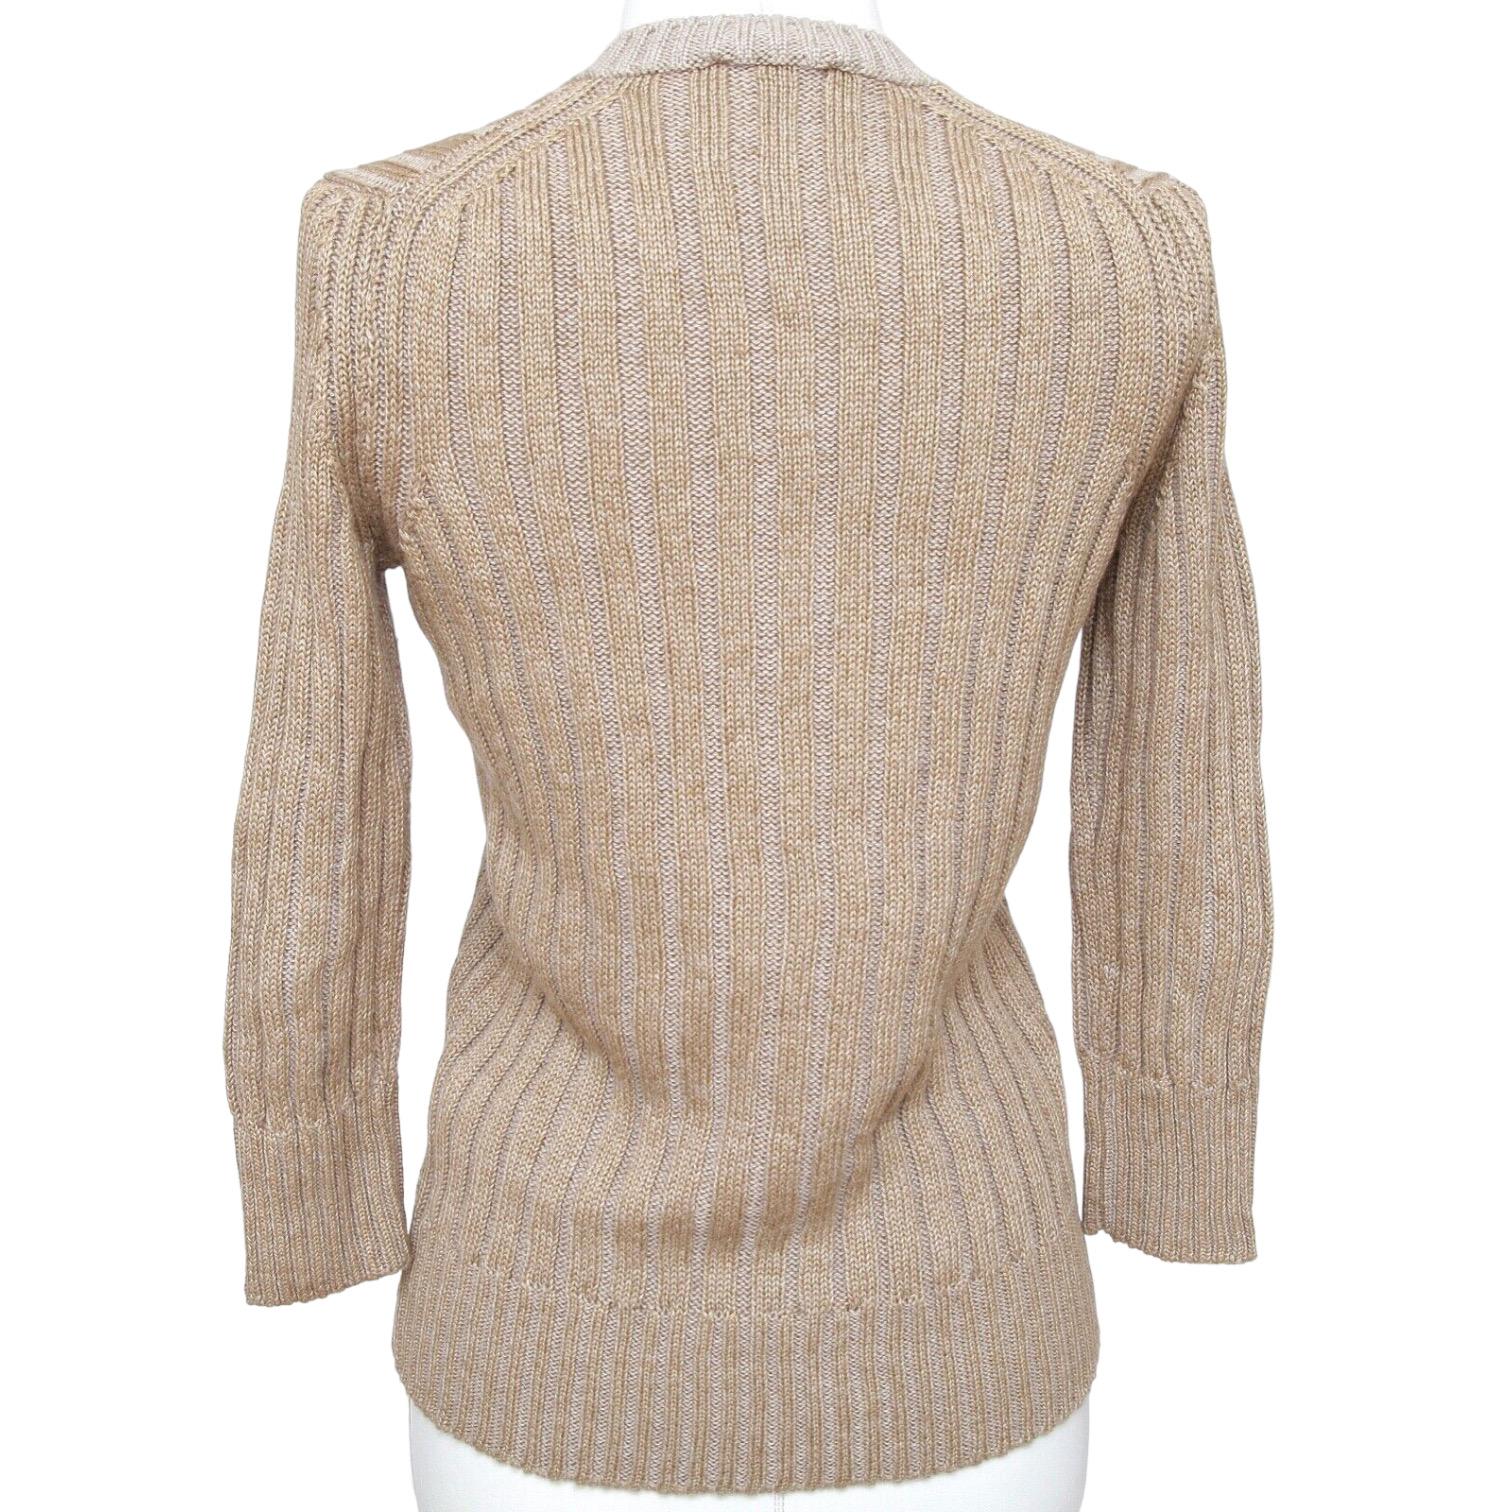 CHLOE Top Sweater Knit 3/4 Sleeve Beige Leather Ribbed Sz XS 2011 3